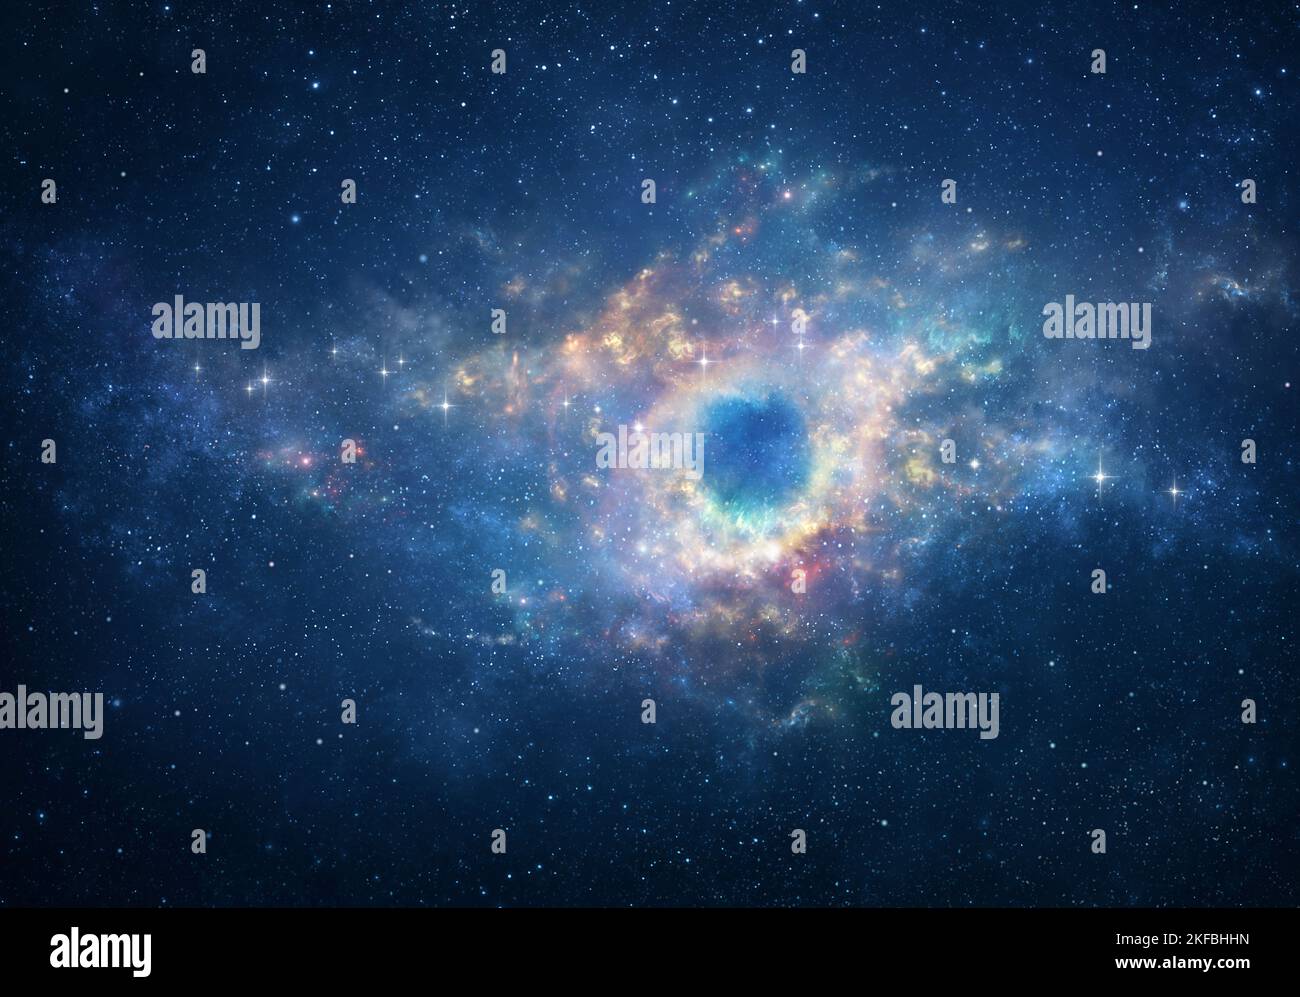 Space view of the Universe, on a spiral galaxy. Beautiful nebula and bright stars into deep space. Stock Photo